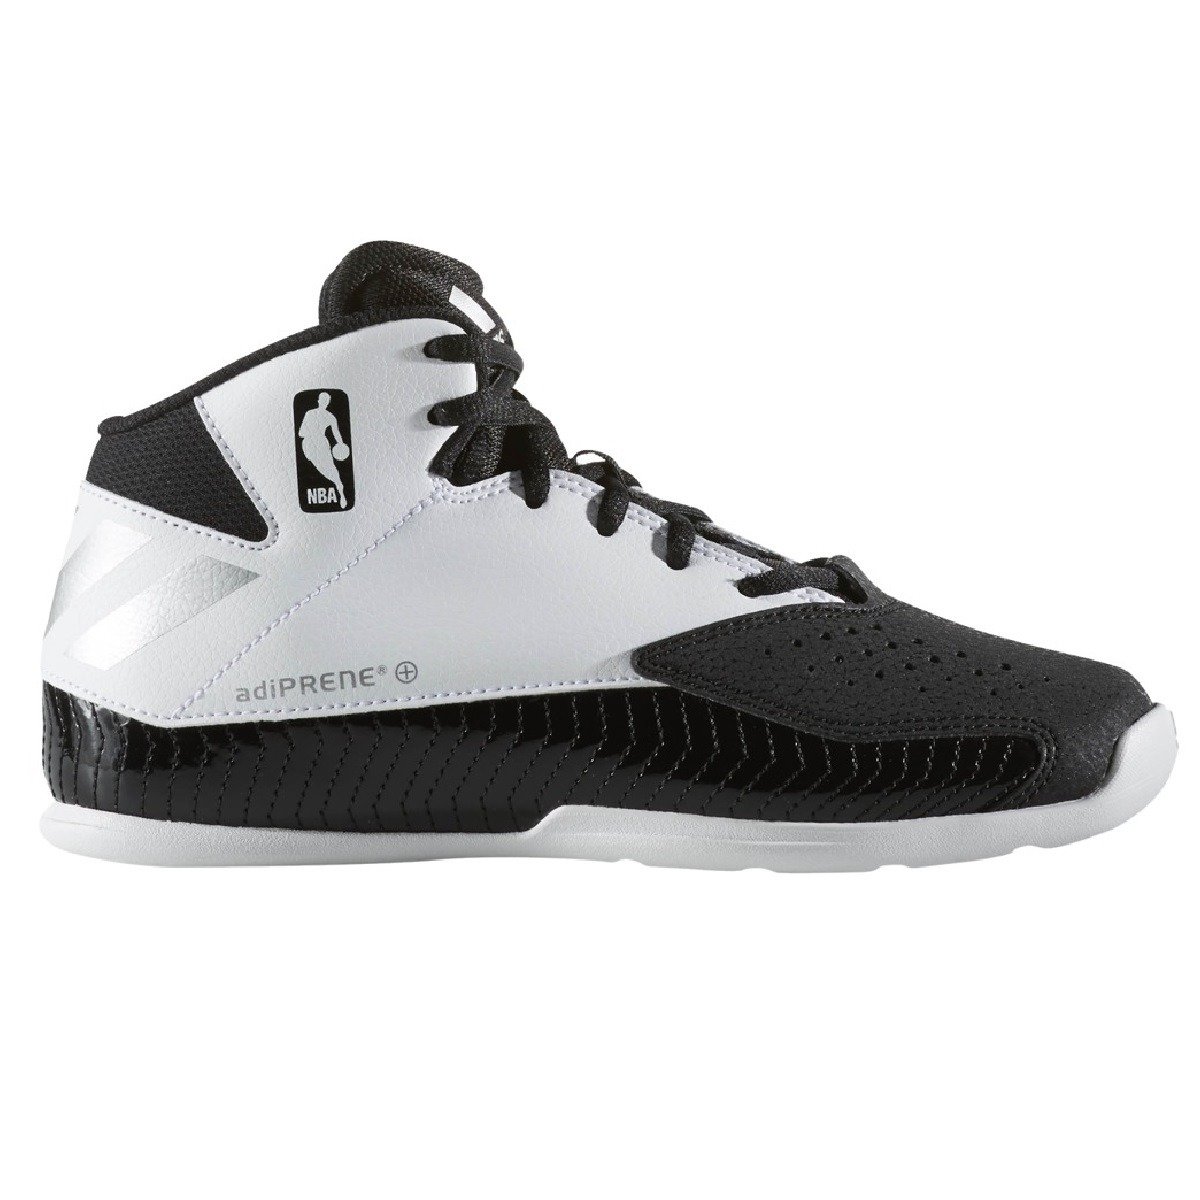 Adidas Next  NBA Level Speed 5 Shoes  B49616 Shoes  